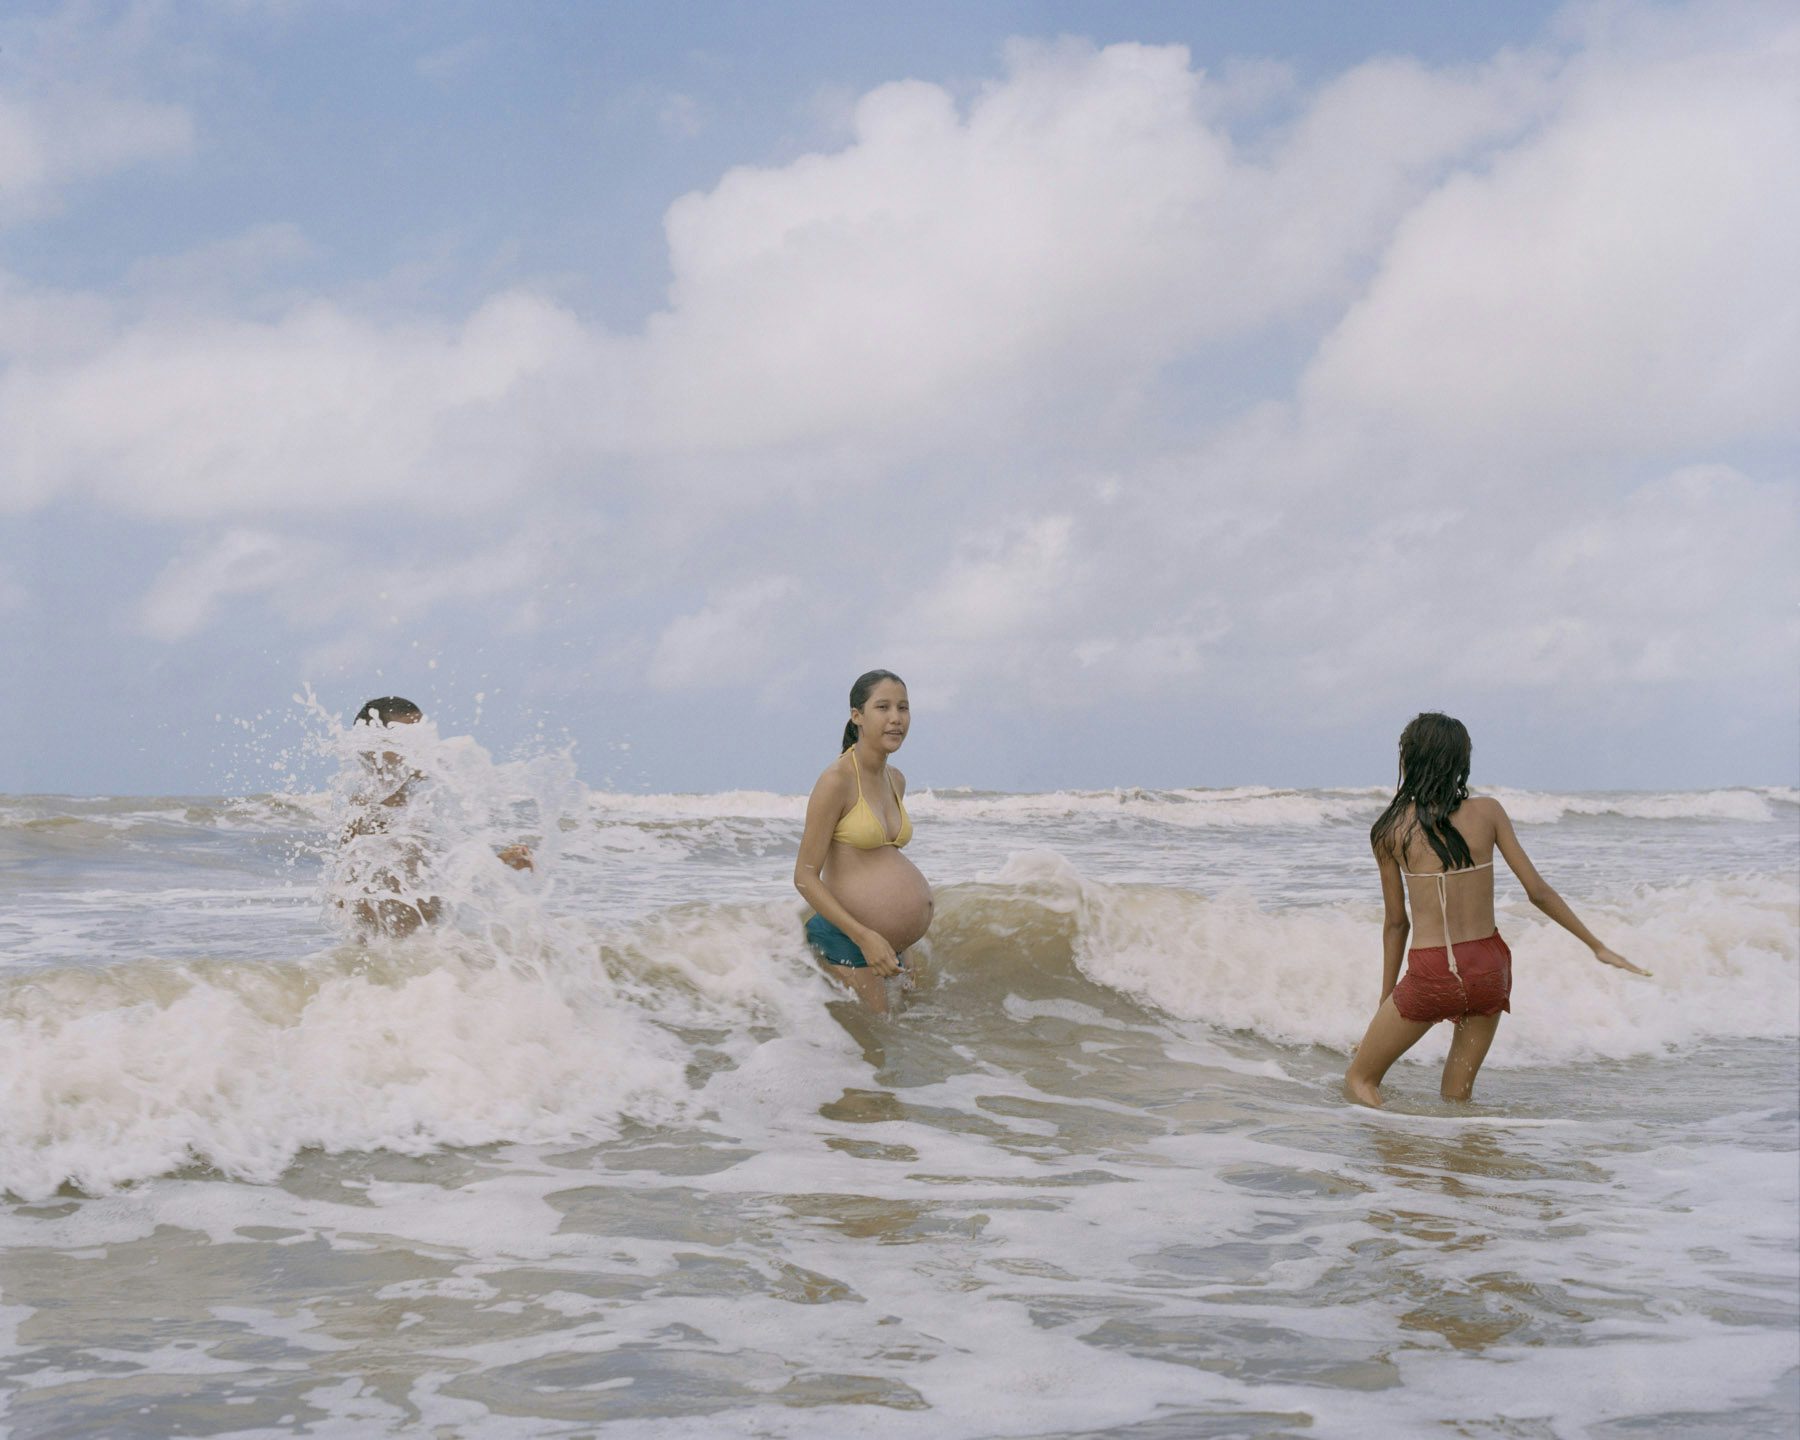 Image by Silvana Trevale of three people playing in the sea, including one pregnant person